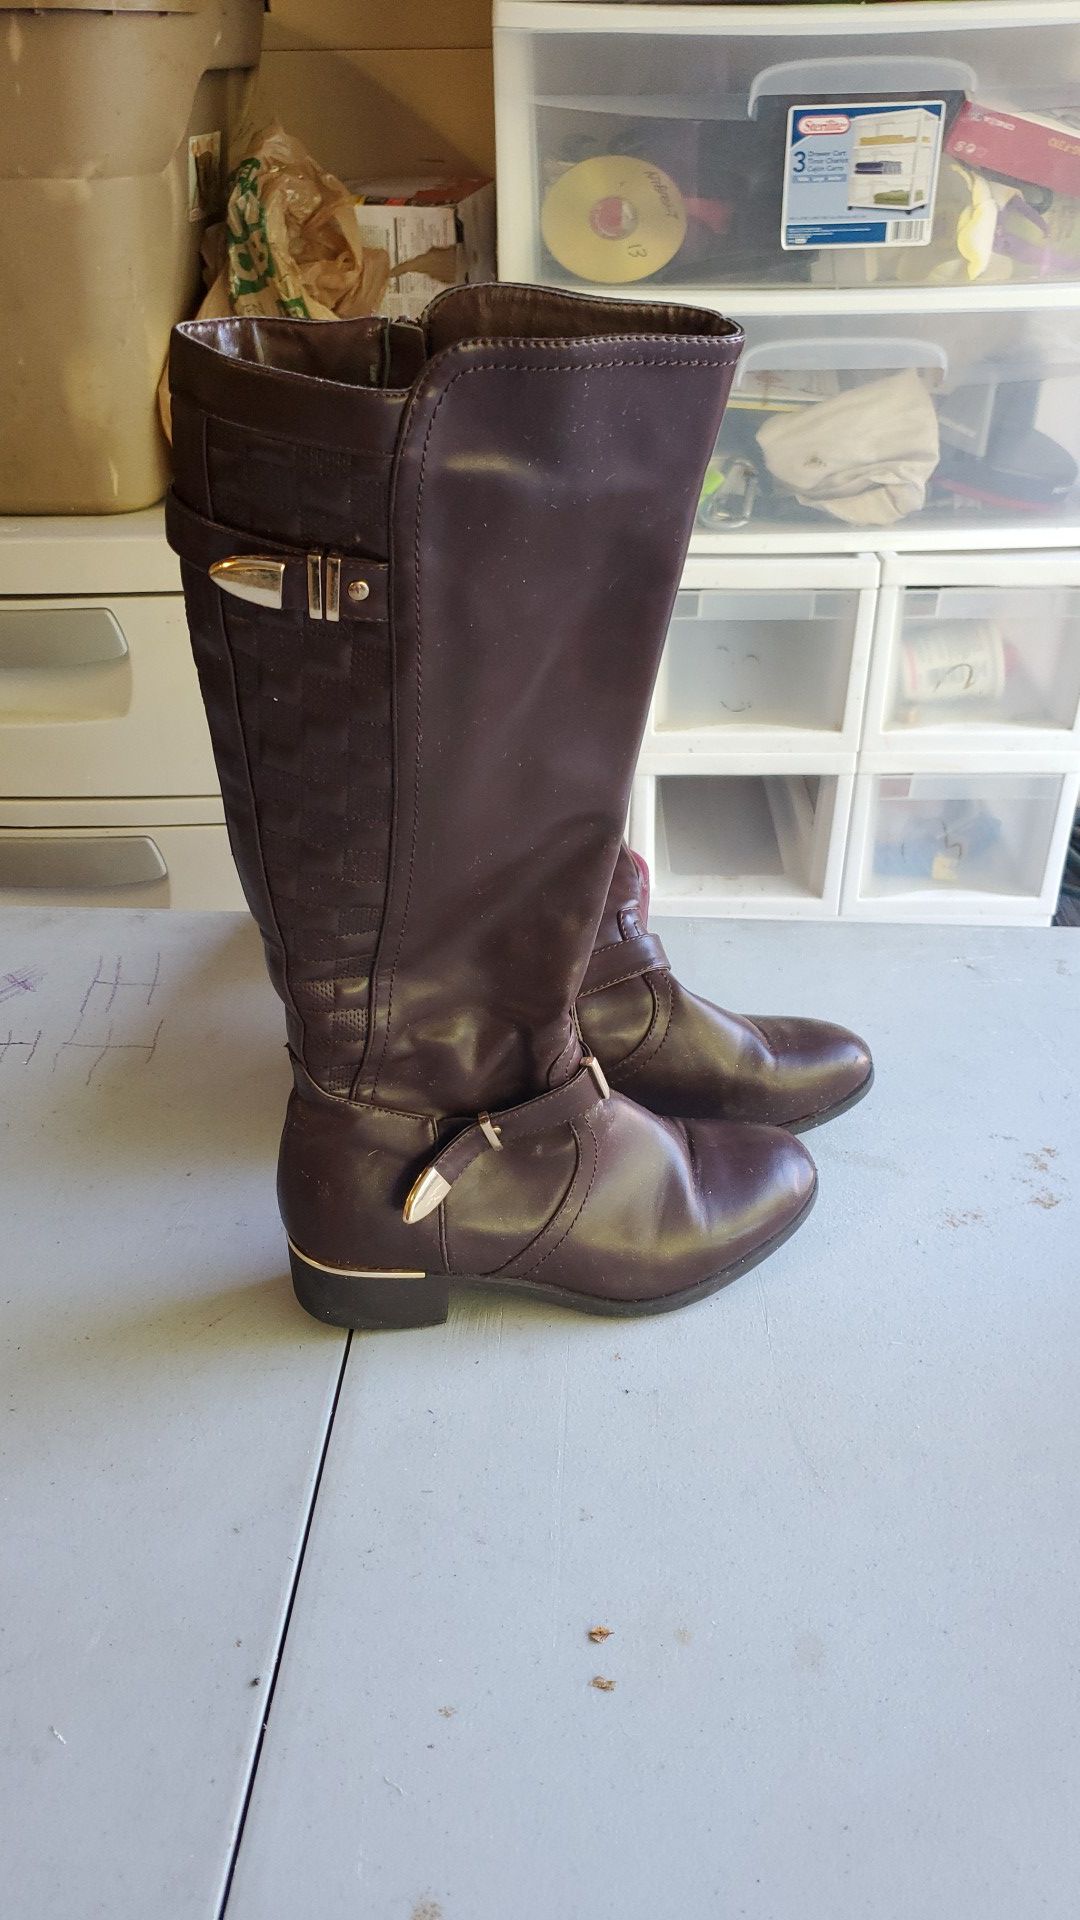 Via Pinky Women's Size 9 1/2 Brown Boots